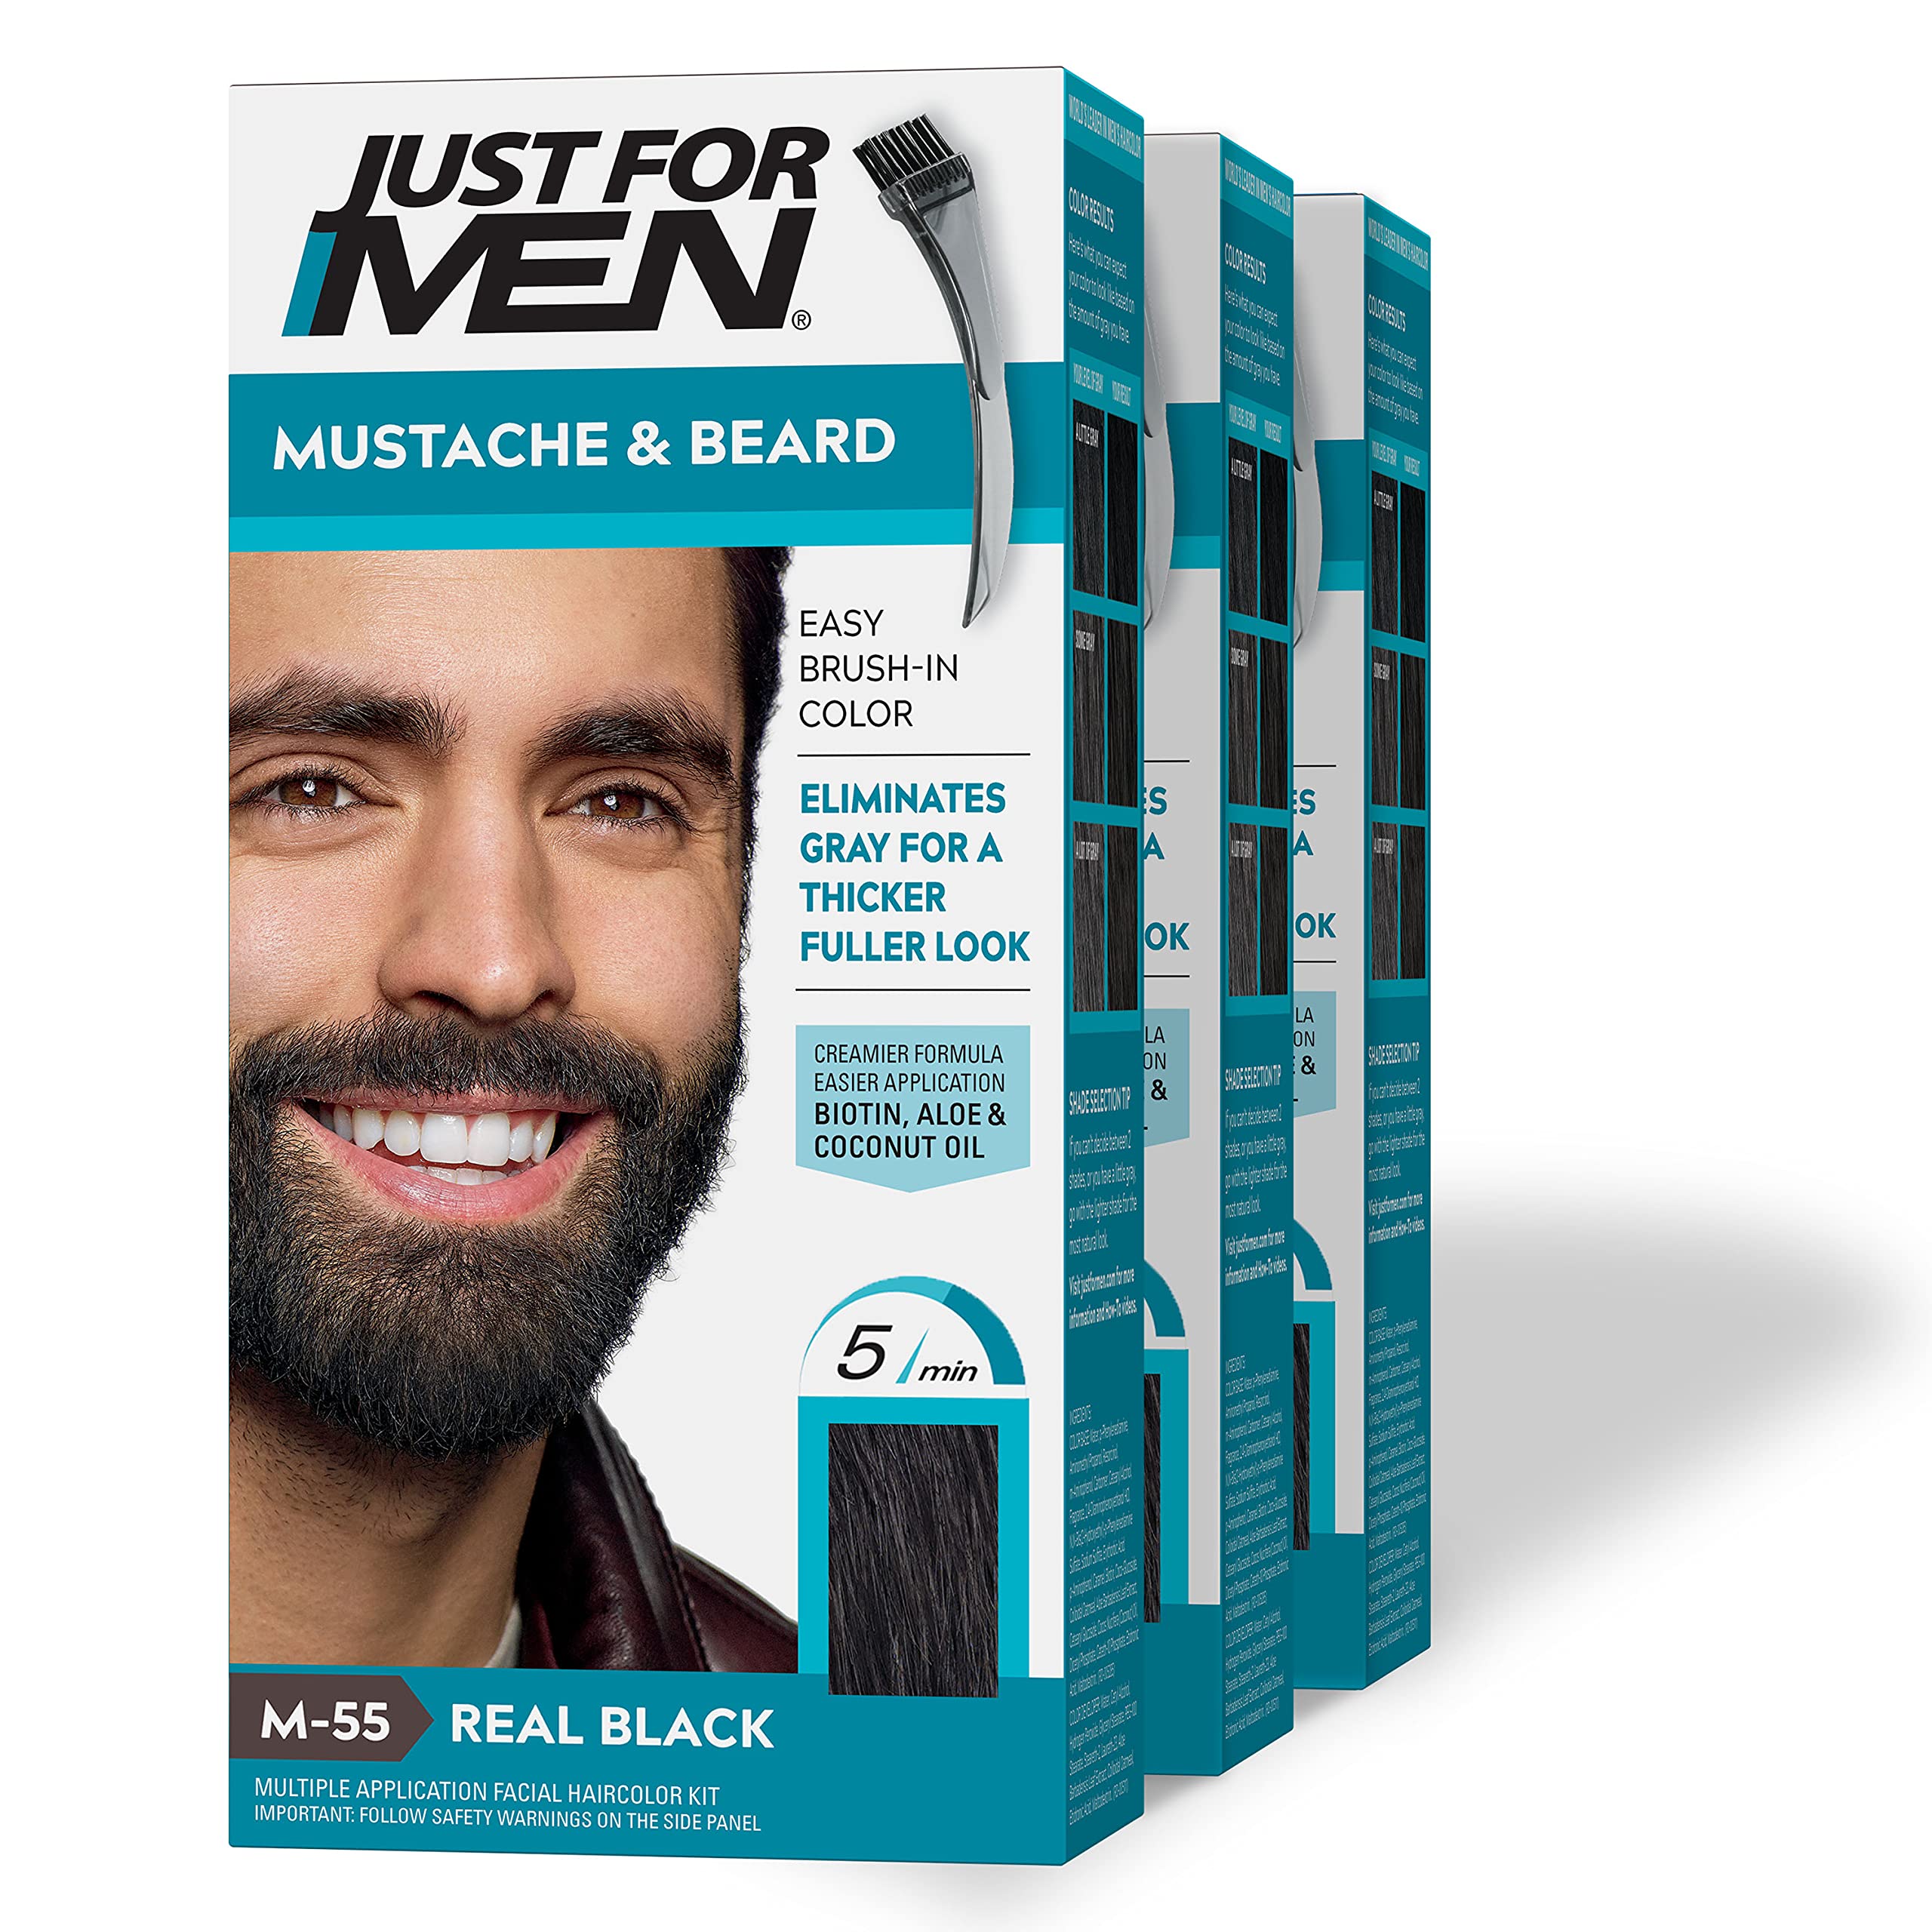 Just For Men Mustache & Beard, Beard Dye for Men with Brush Included for Easy Application, With Biotin Aloe and coconut Oil for 